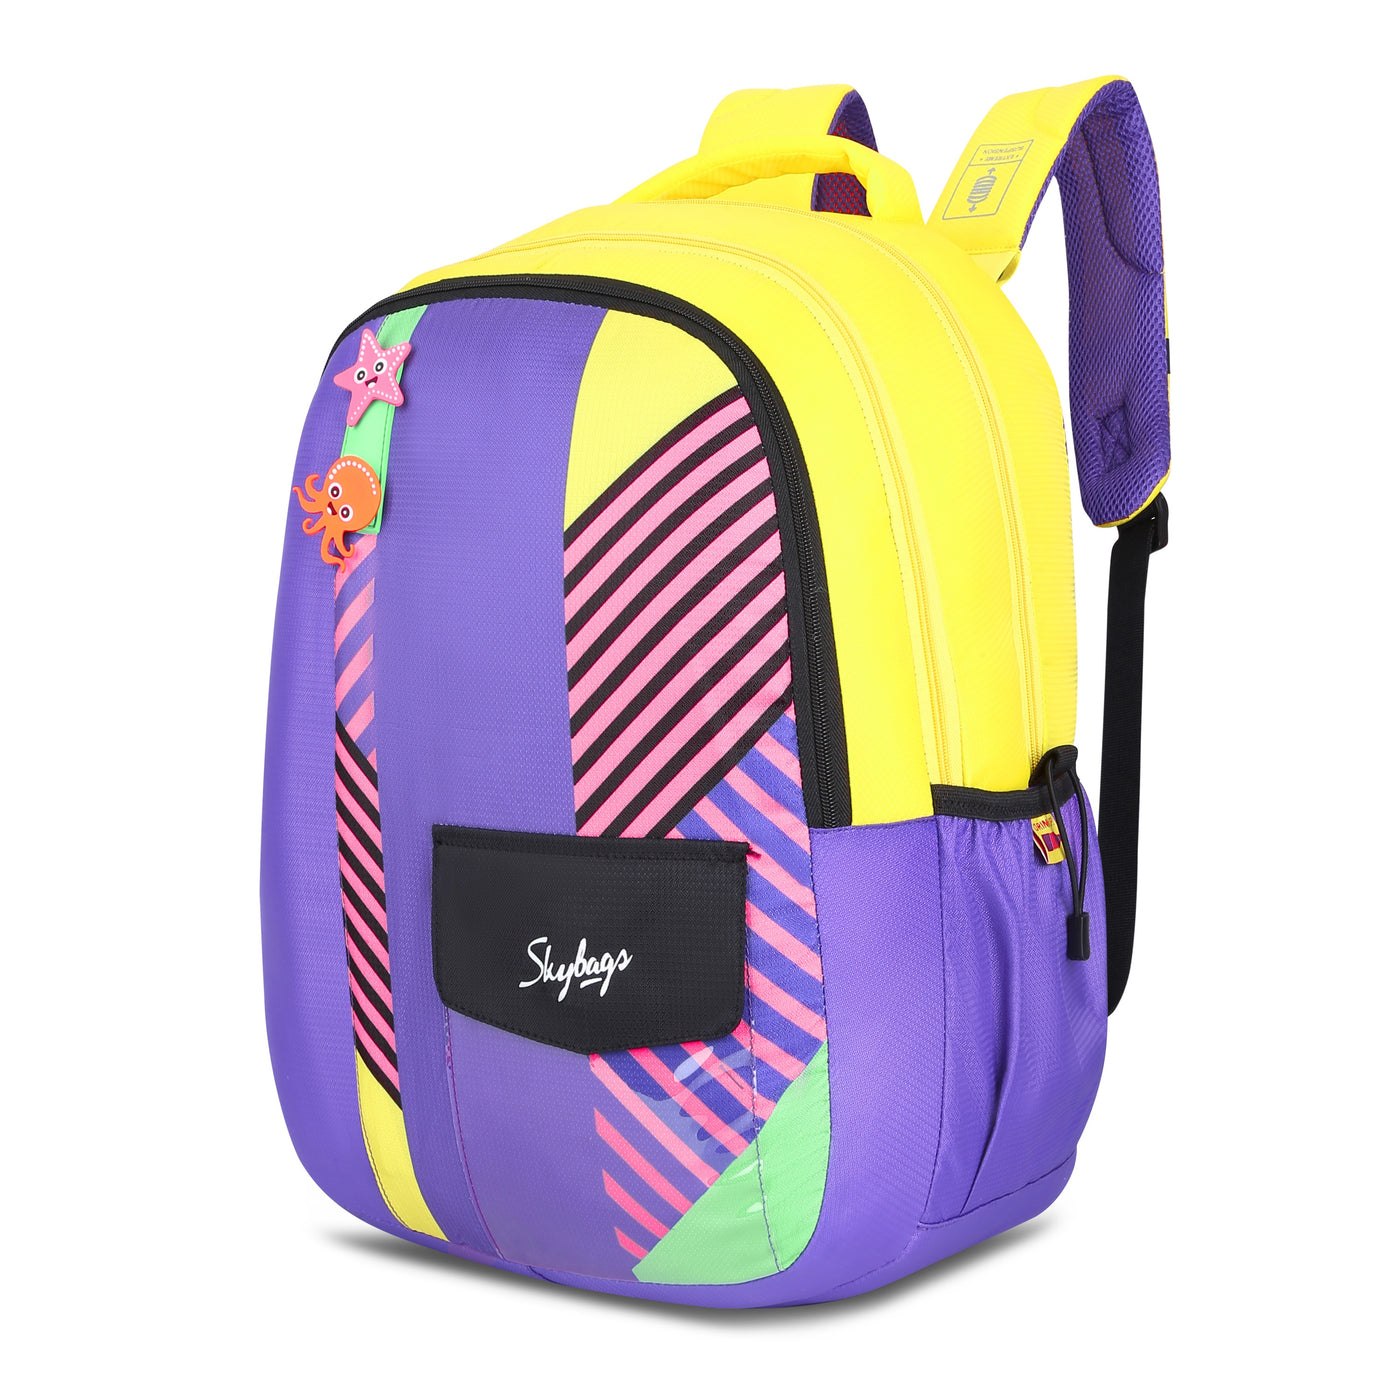 Skybags MAZE PRO 01 